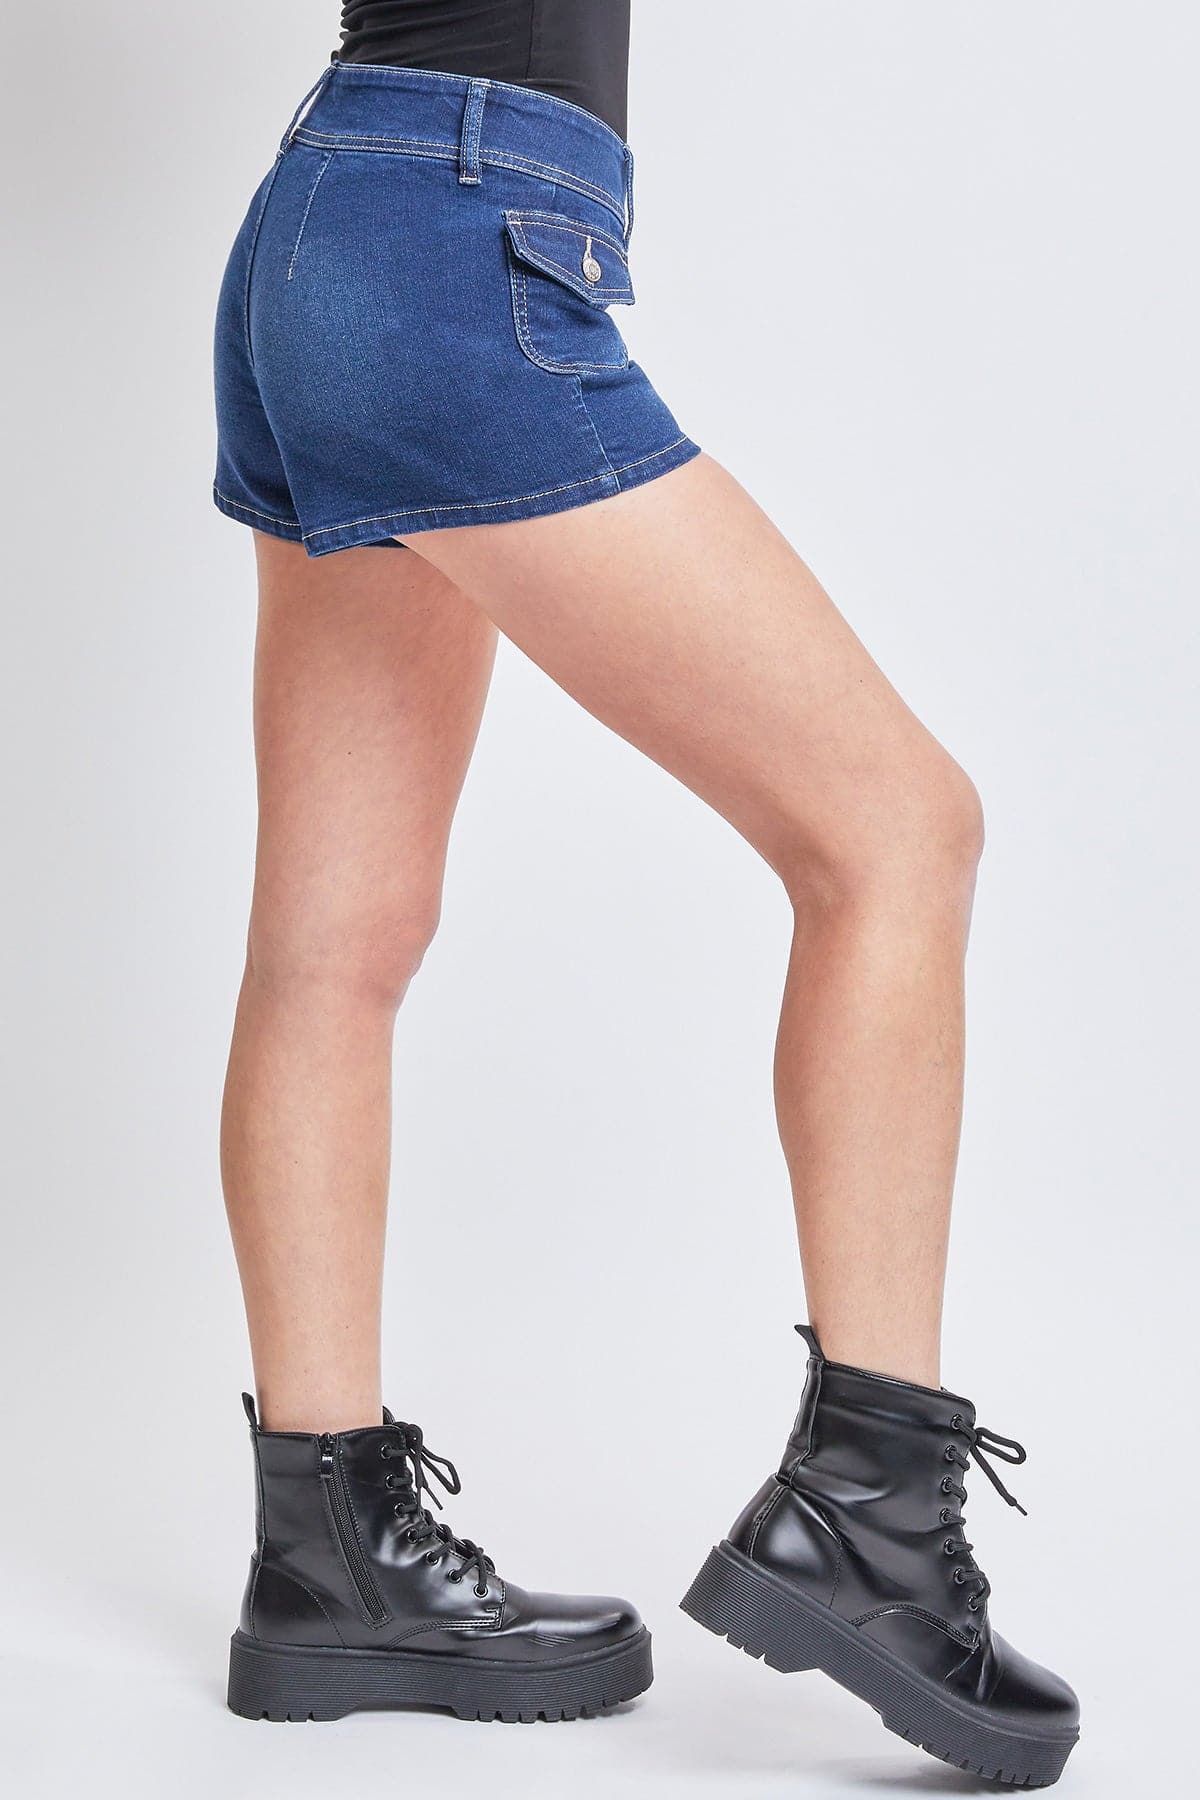 Women's Low Rise Denim Shorts with Side Patch Pockets